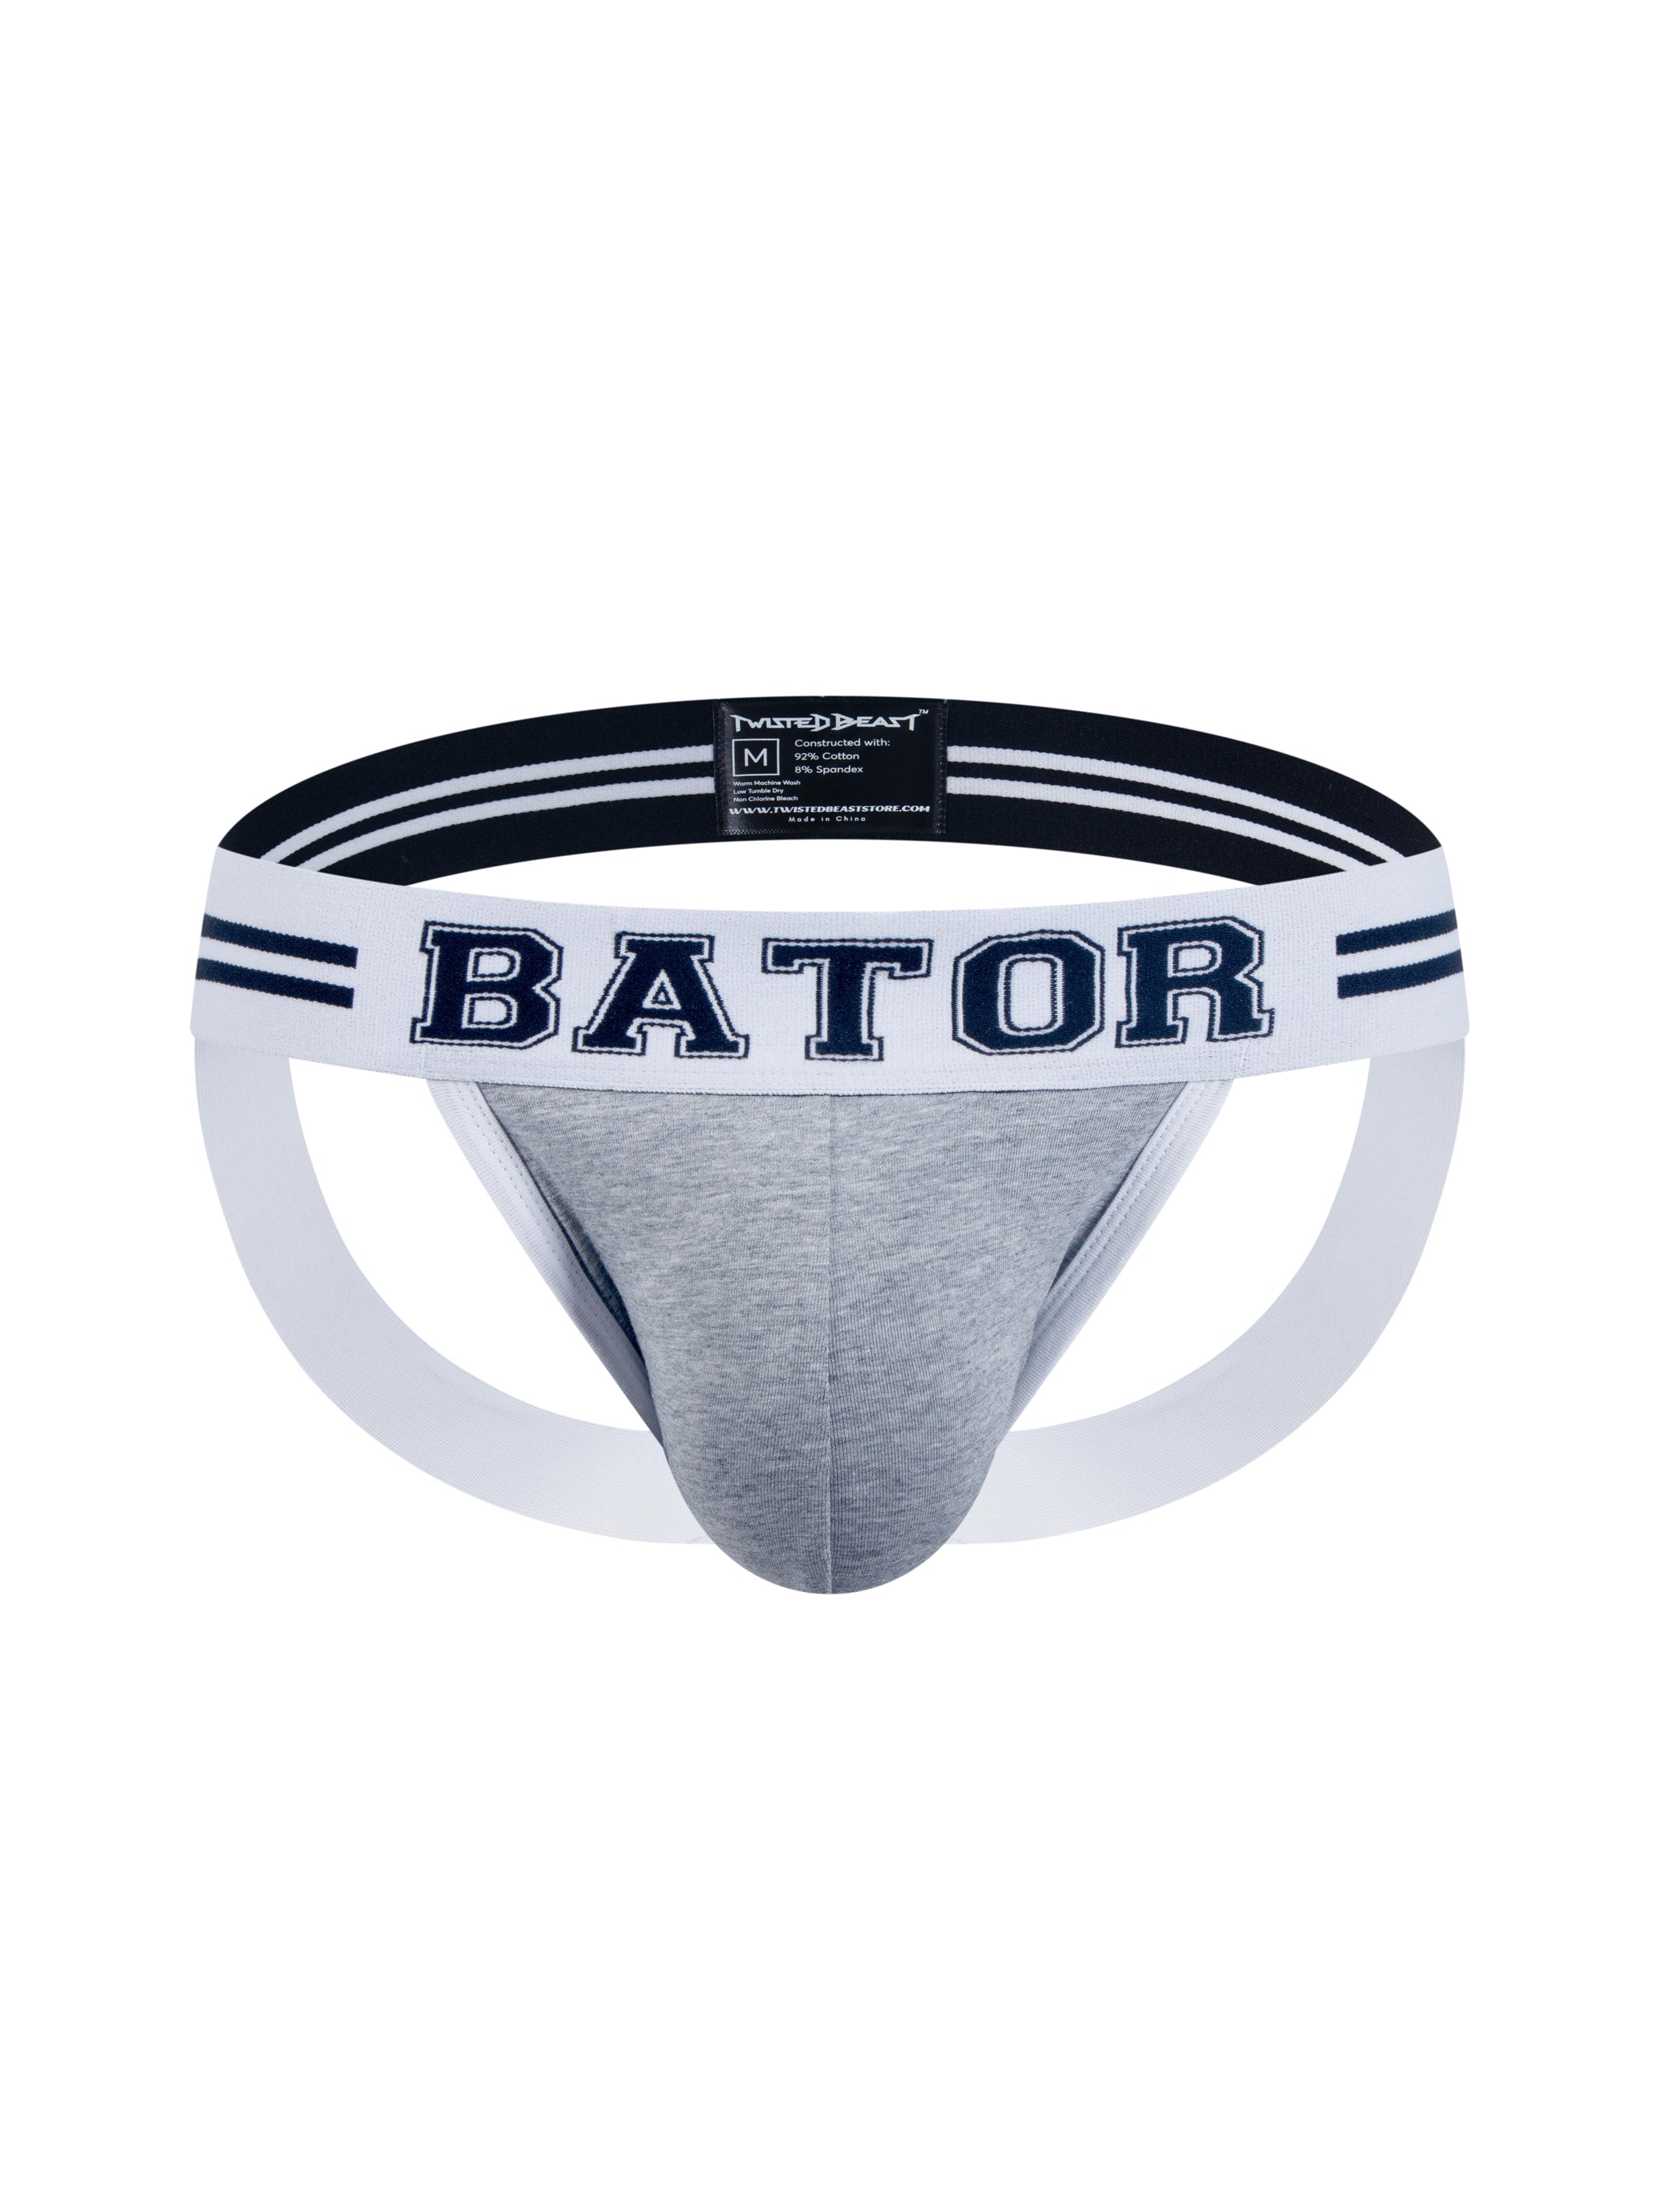 A front product photo of a Bator Jock in Grey.